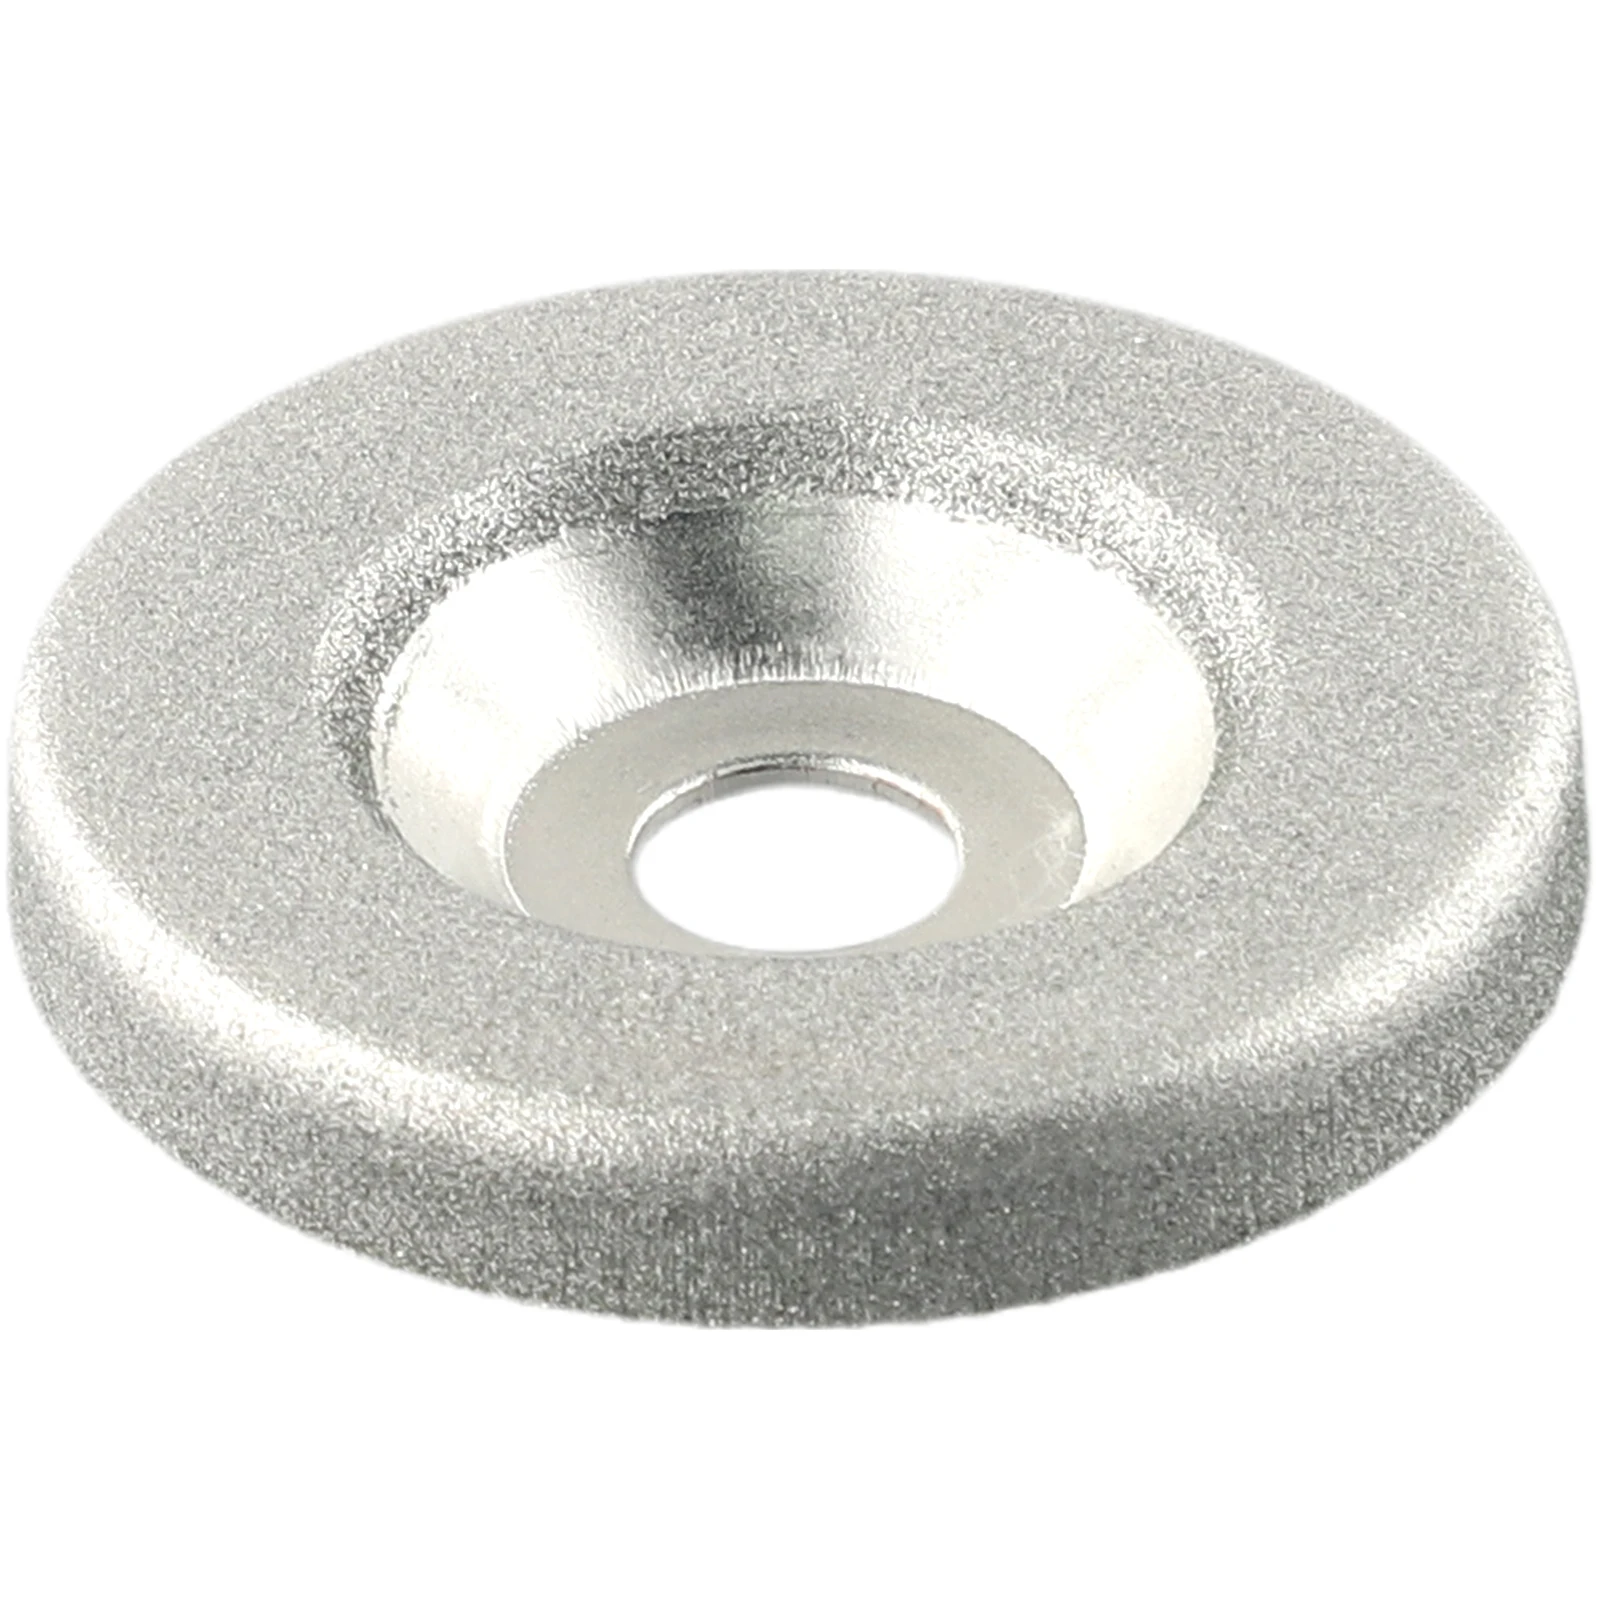 1pc 50mm Diamond Grinding Wheel Circle Disc 180 Grit For Multifunctional Sharpener Angle Cutting Wheel Rotary Tool Accessories